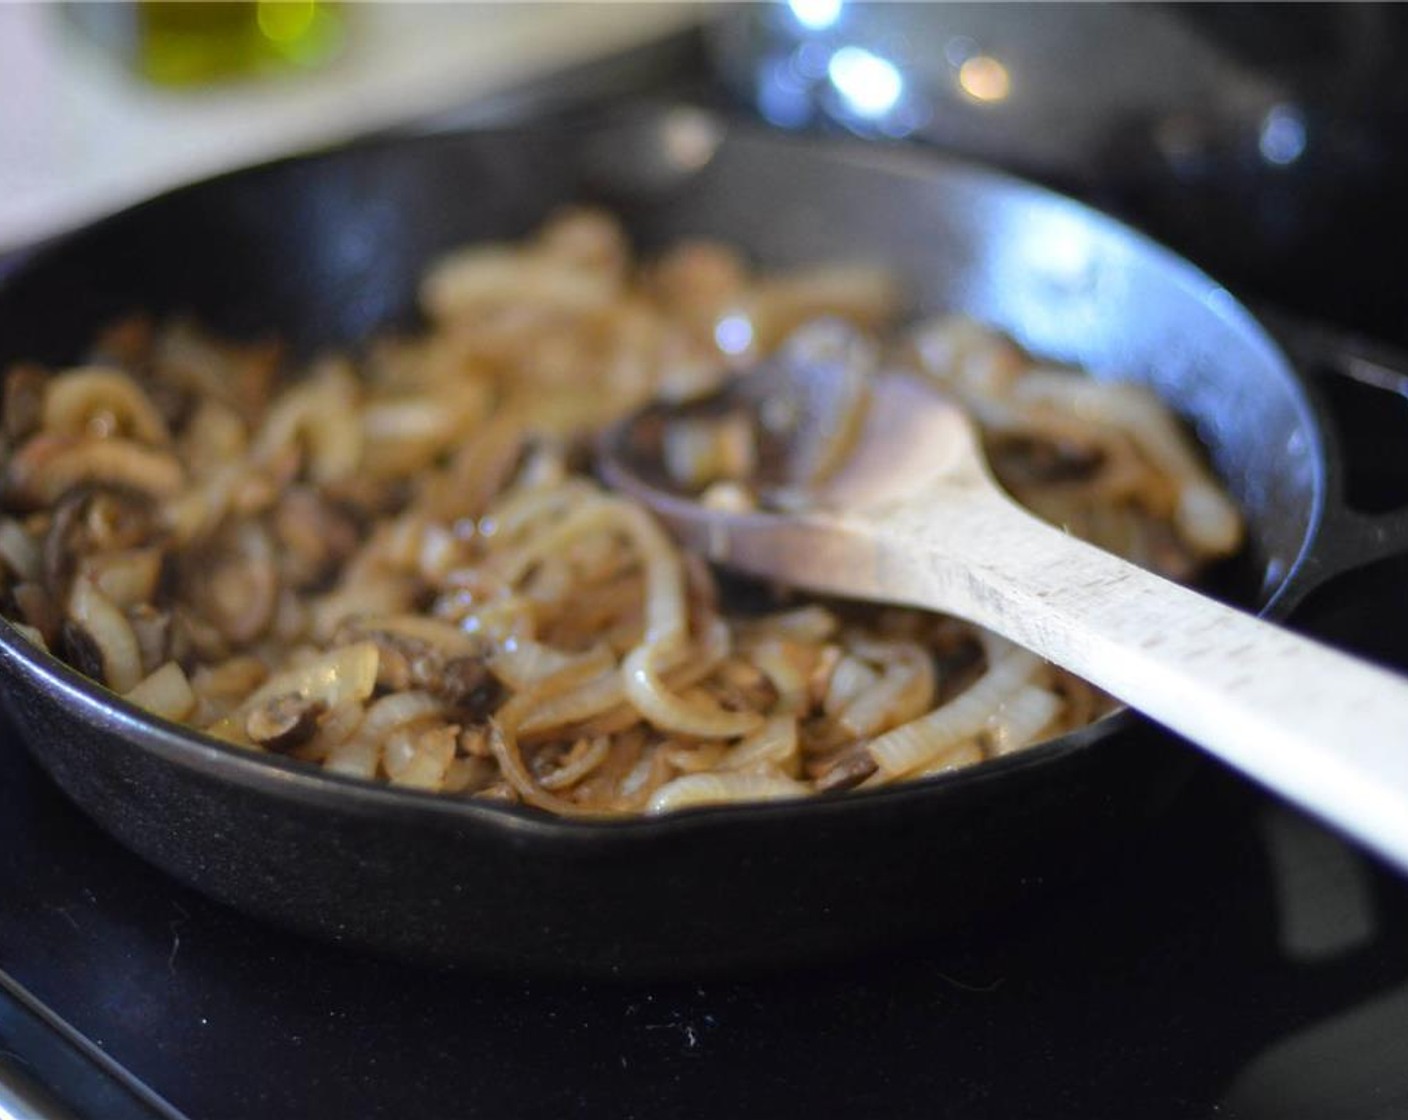 step 8 Remove skillet from heat, add Balsamic Vinegar (2 Tbsp), and toss to coat. Return skillet to heat and continue to cook, tossing occasionally, until onions are browned and broken down, another 10 to 15 minutes.